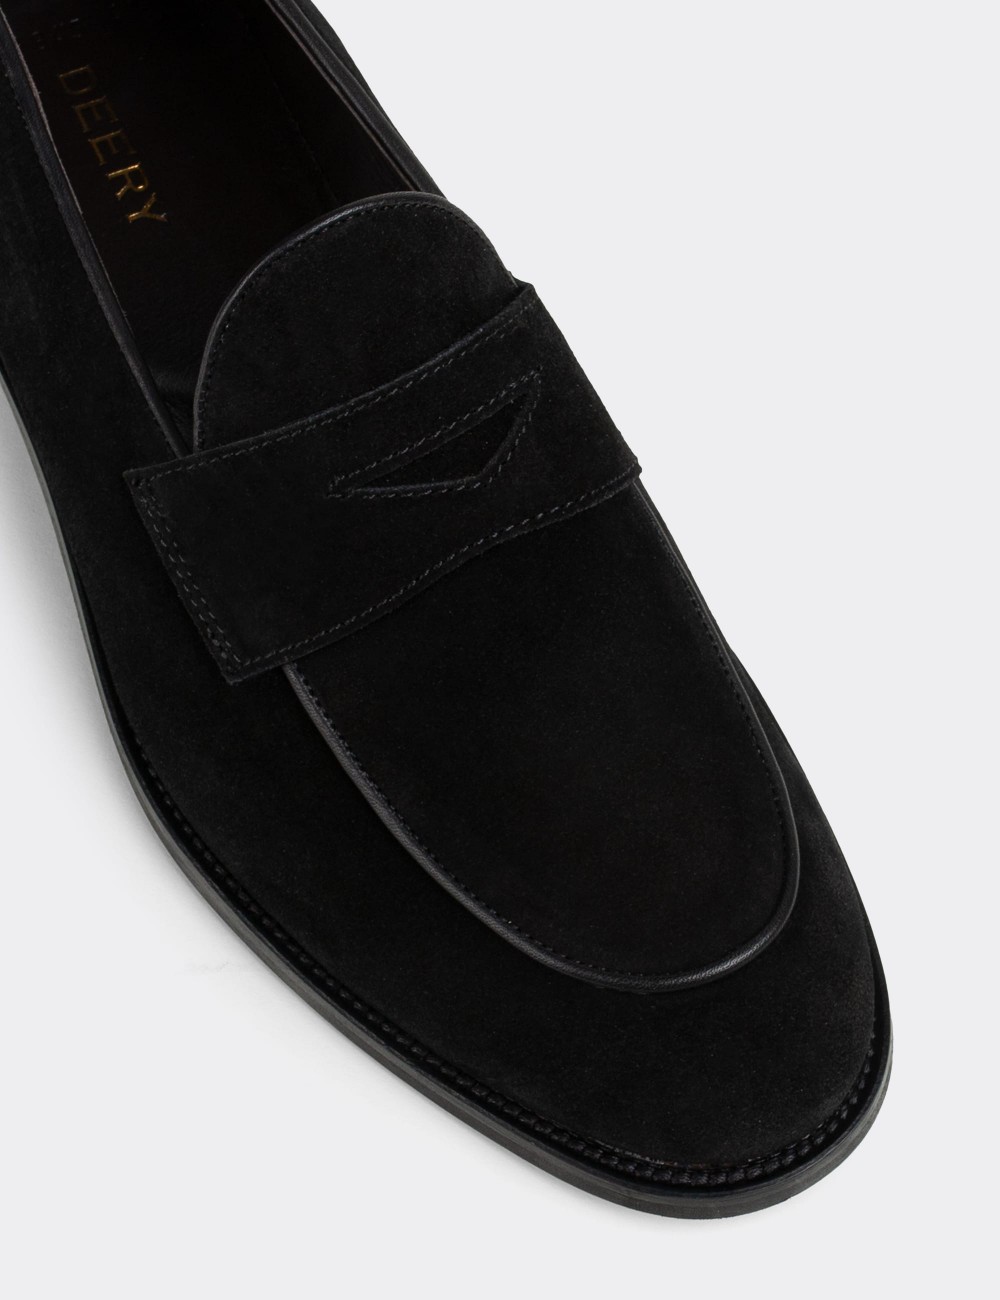 Black Suede Leather Loafers - 01845MSYHN02